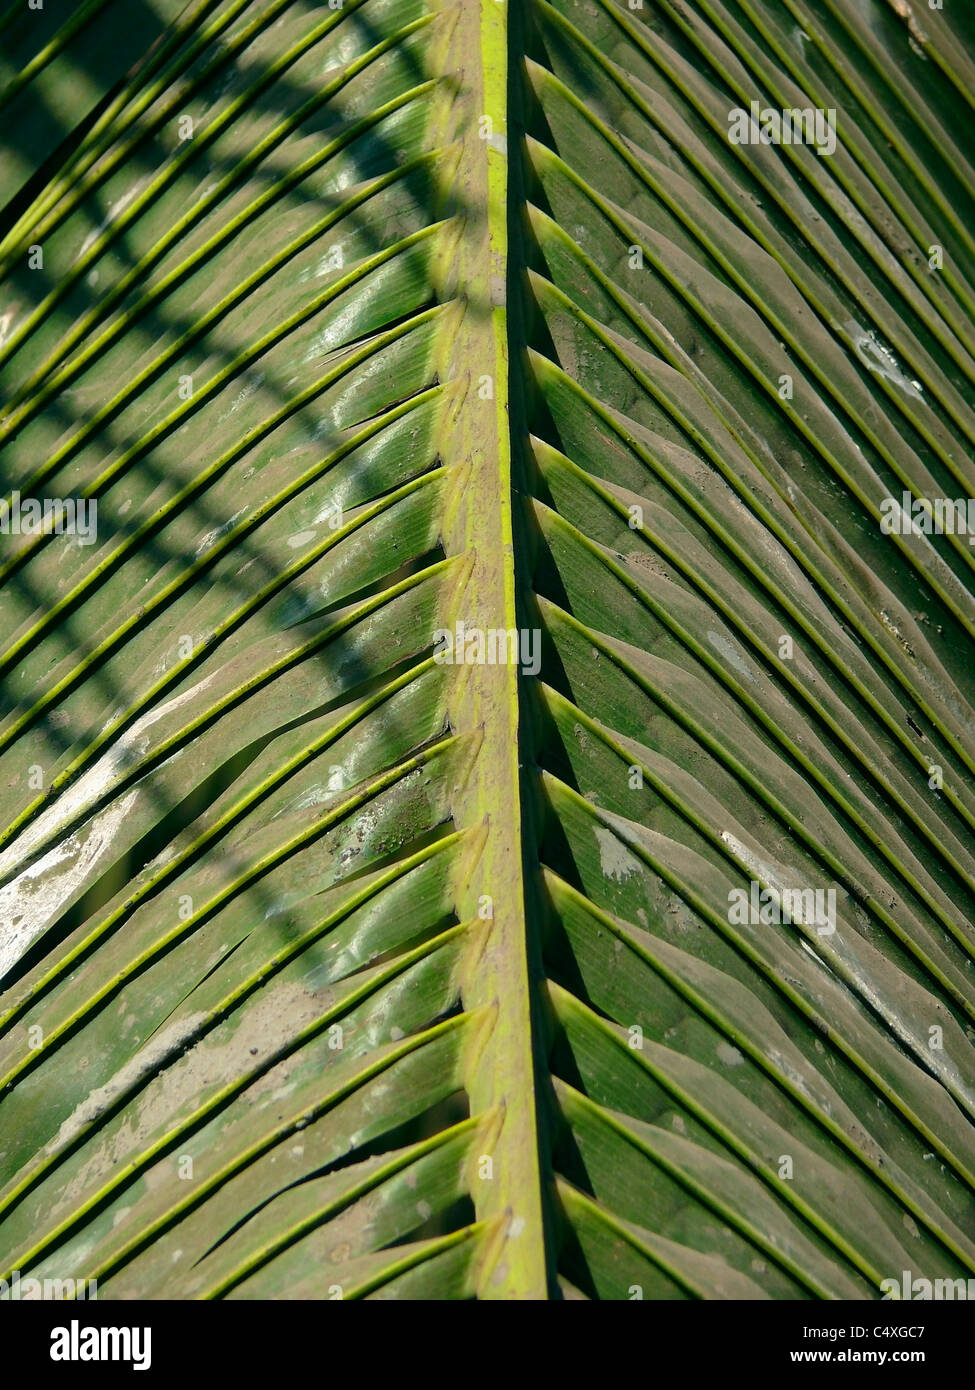 Close-up of palm fronds, Cocos nucifera Stock Photo